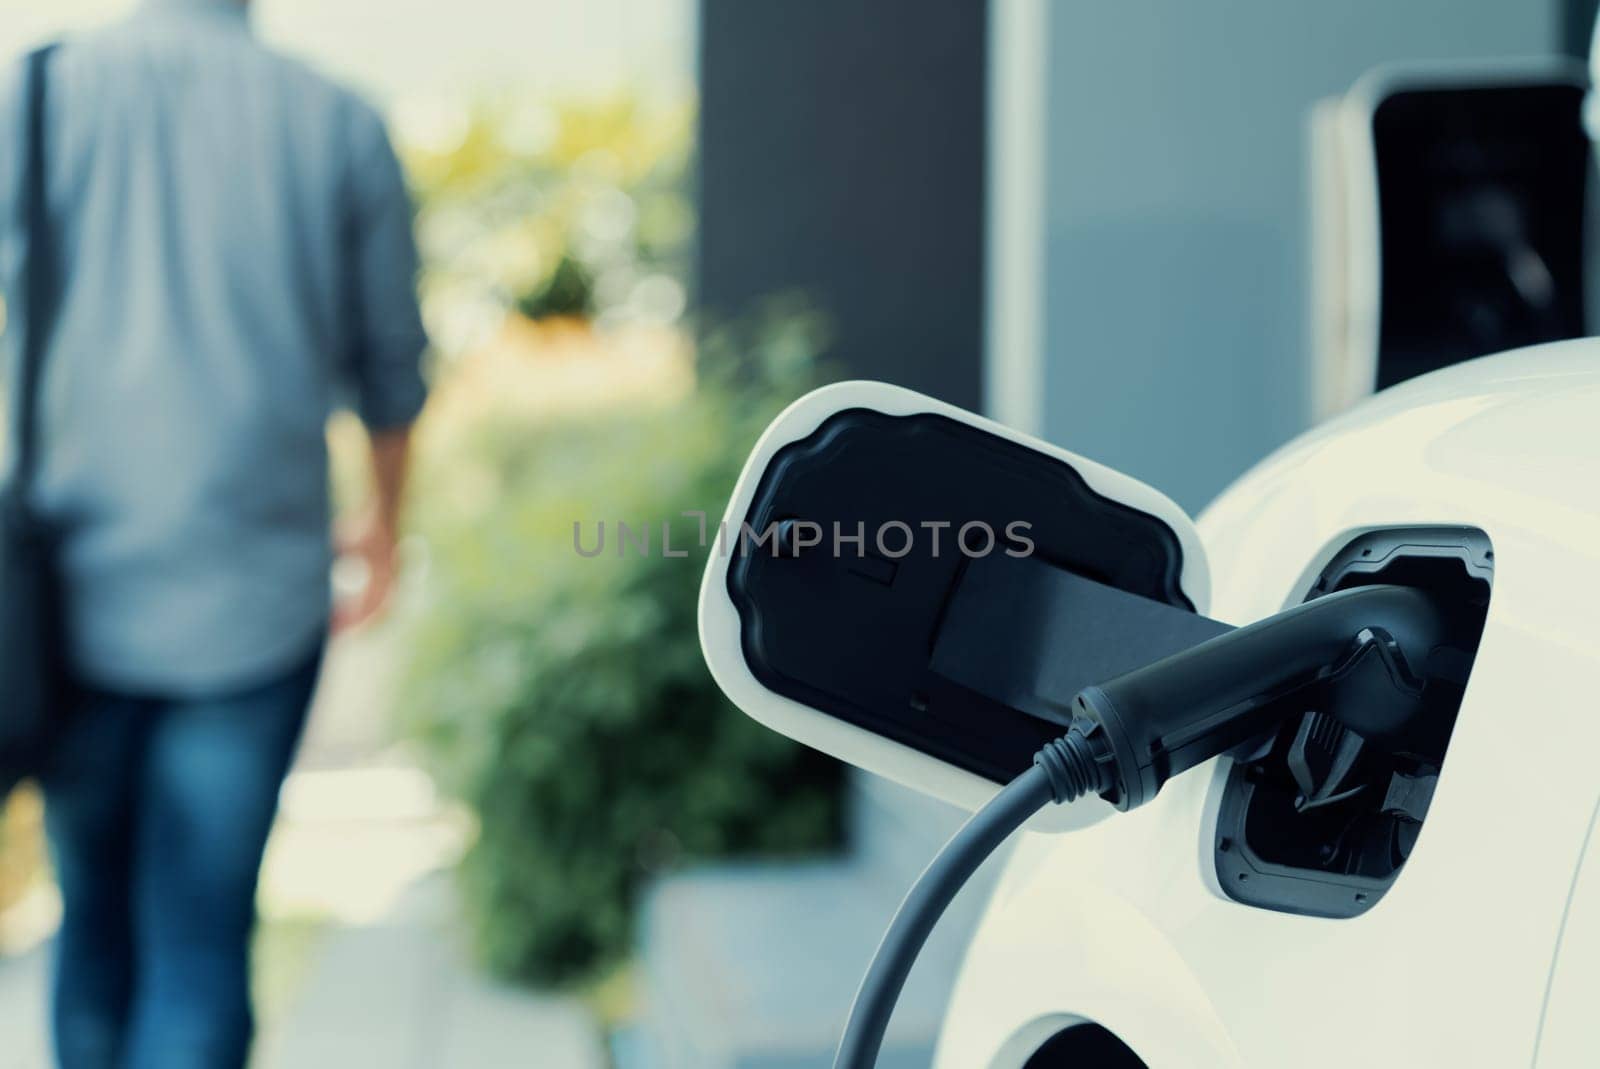 Focus electric car charging at home charging station with blurred progressive man walking in the background. Electric car using renewable clean for eco-friendly concept.